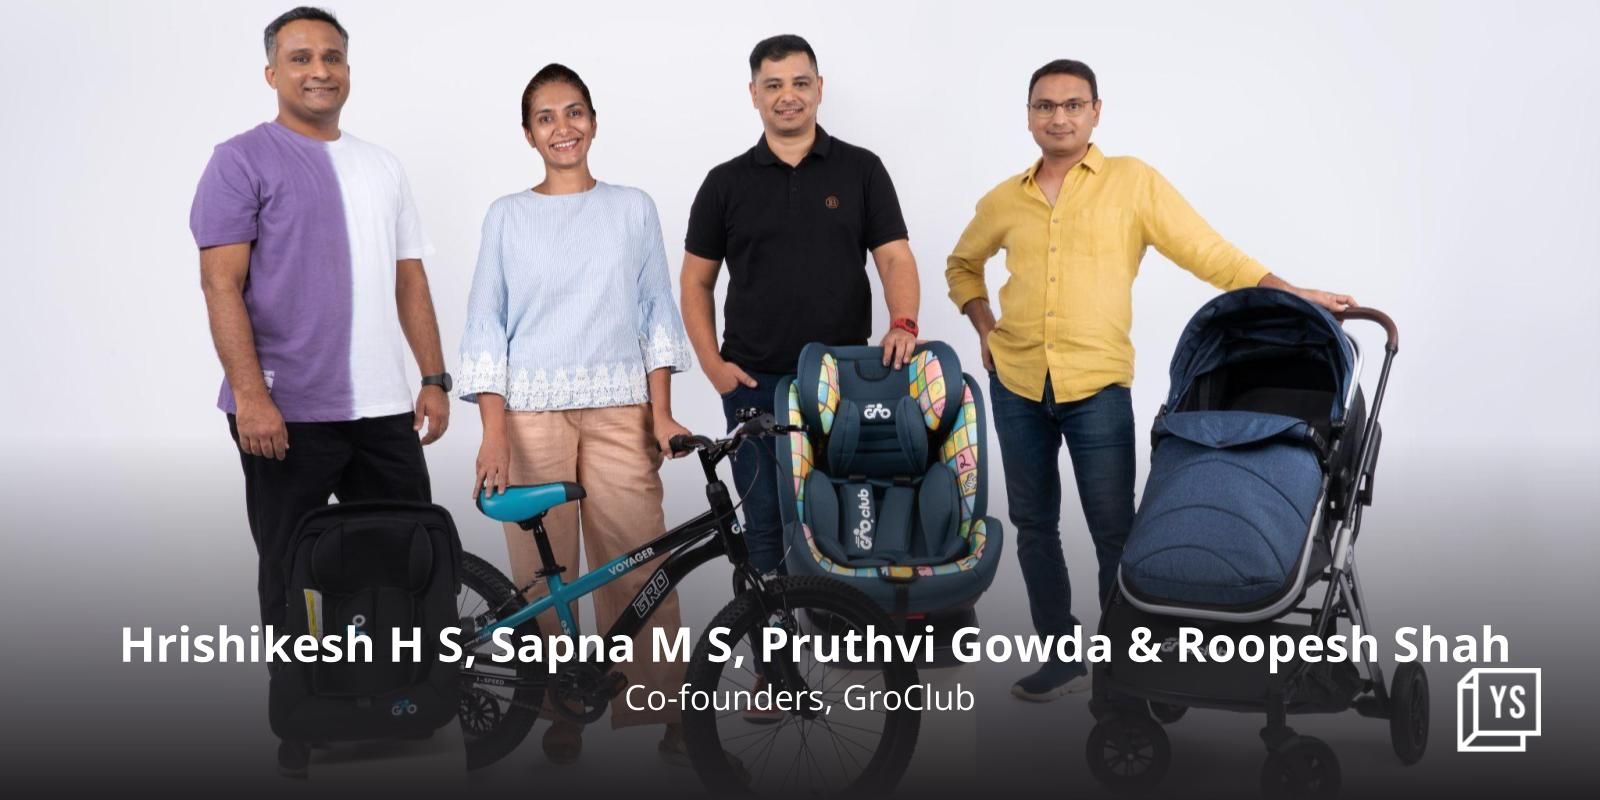 This Bengaluru startup aims to build a 'subscribe and recycle' economy for bicycles, toys 